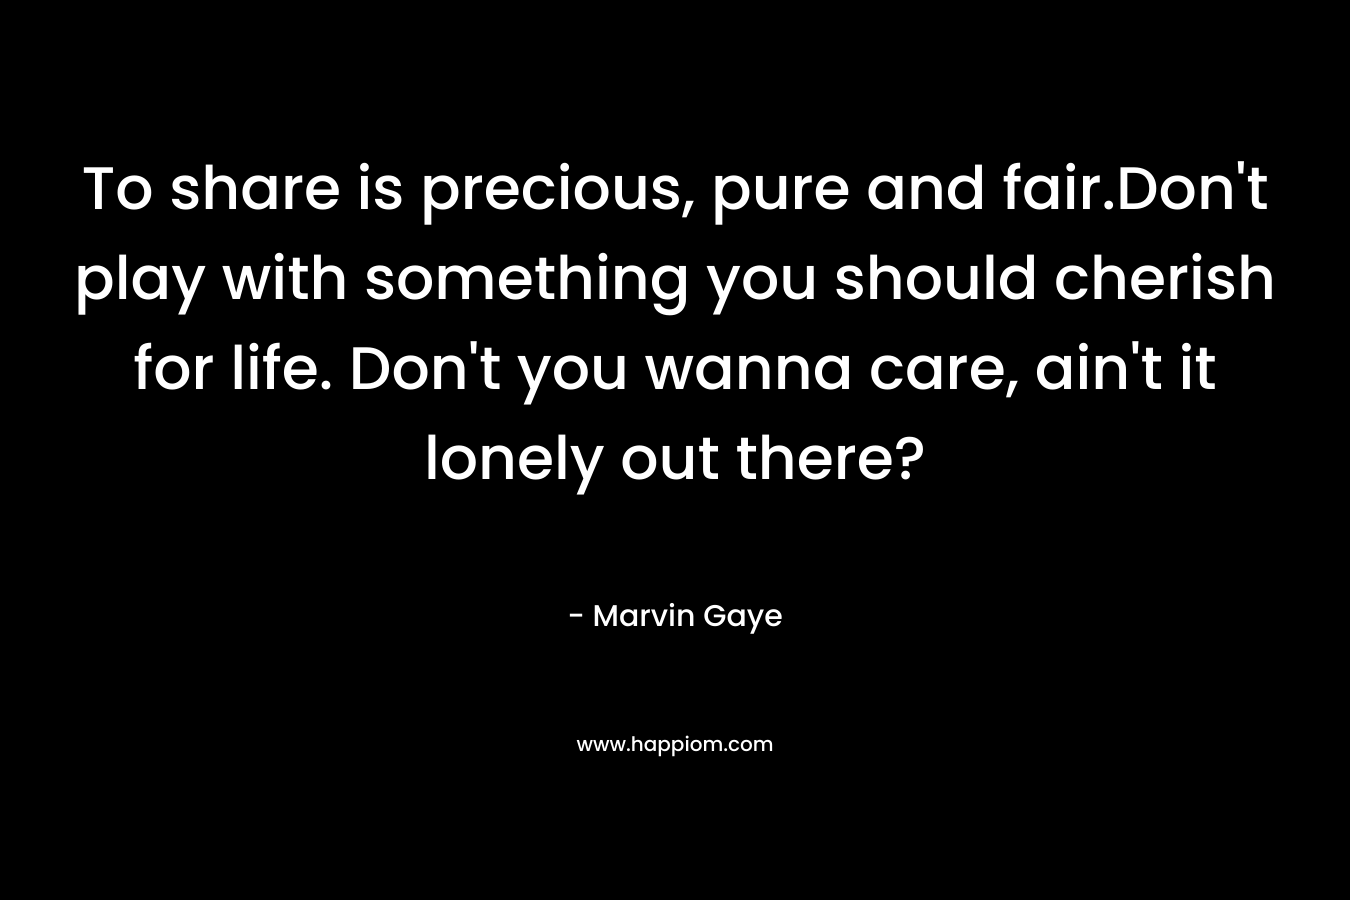 To share is precious, pure and fair.Don’t play with something you should cherish for life. Don’t you wanna care, ain’t it lonely out there? – Marvin Gaye